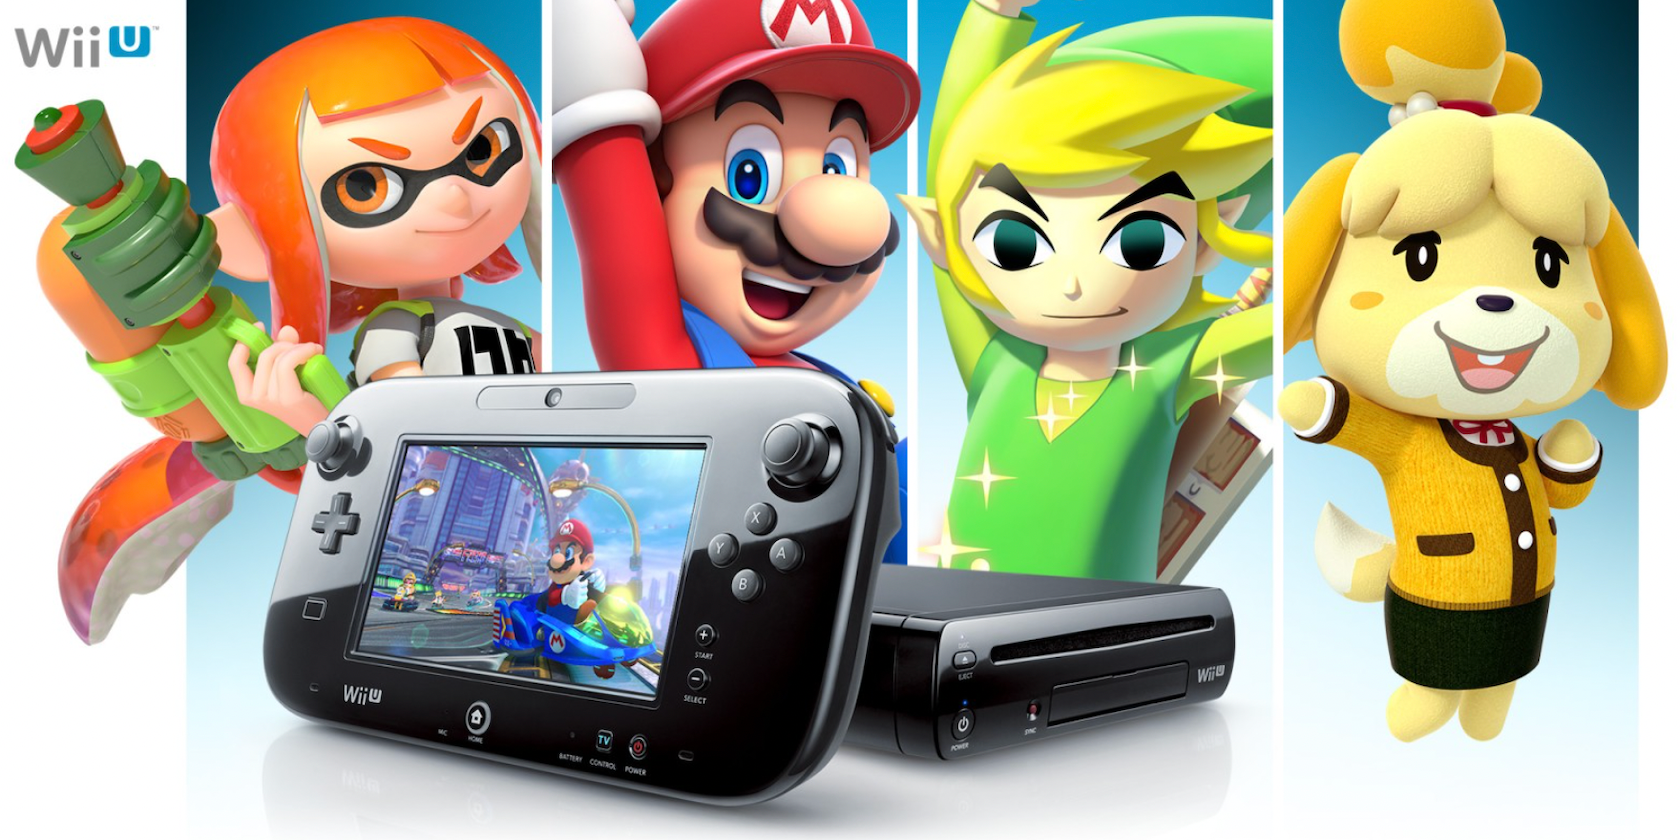 A Wii U with characters in the background like Link and Mario